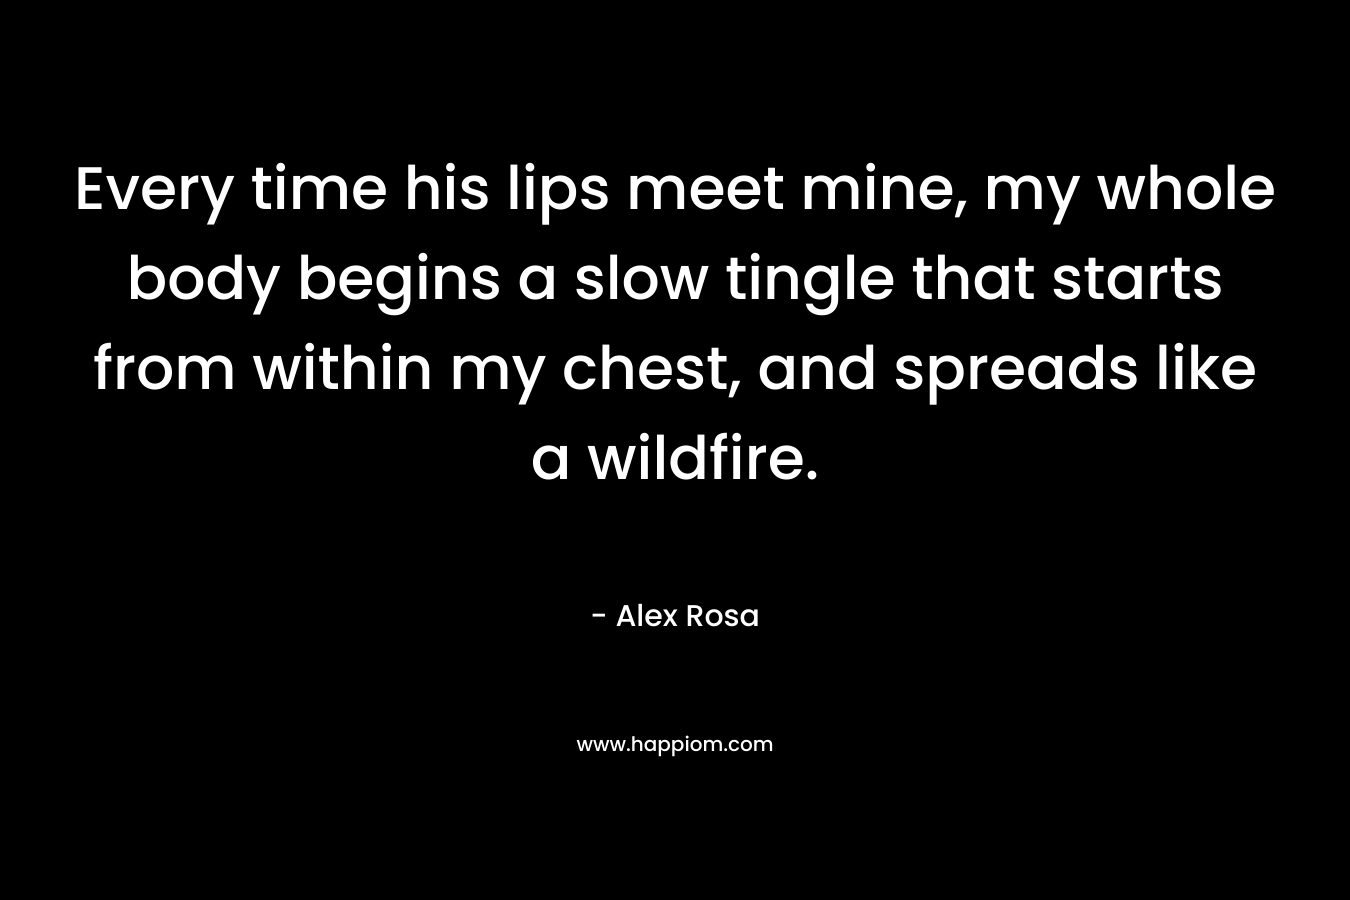 Every time his lips meet mine, my whole body begins a slow tingle that starts from within my chest, and spreads like a wildfire.